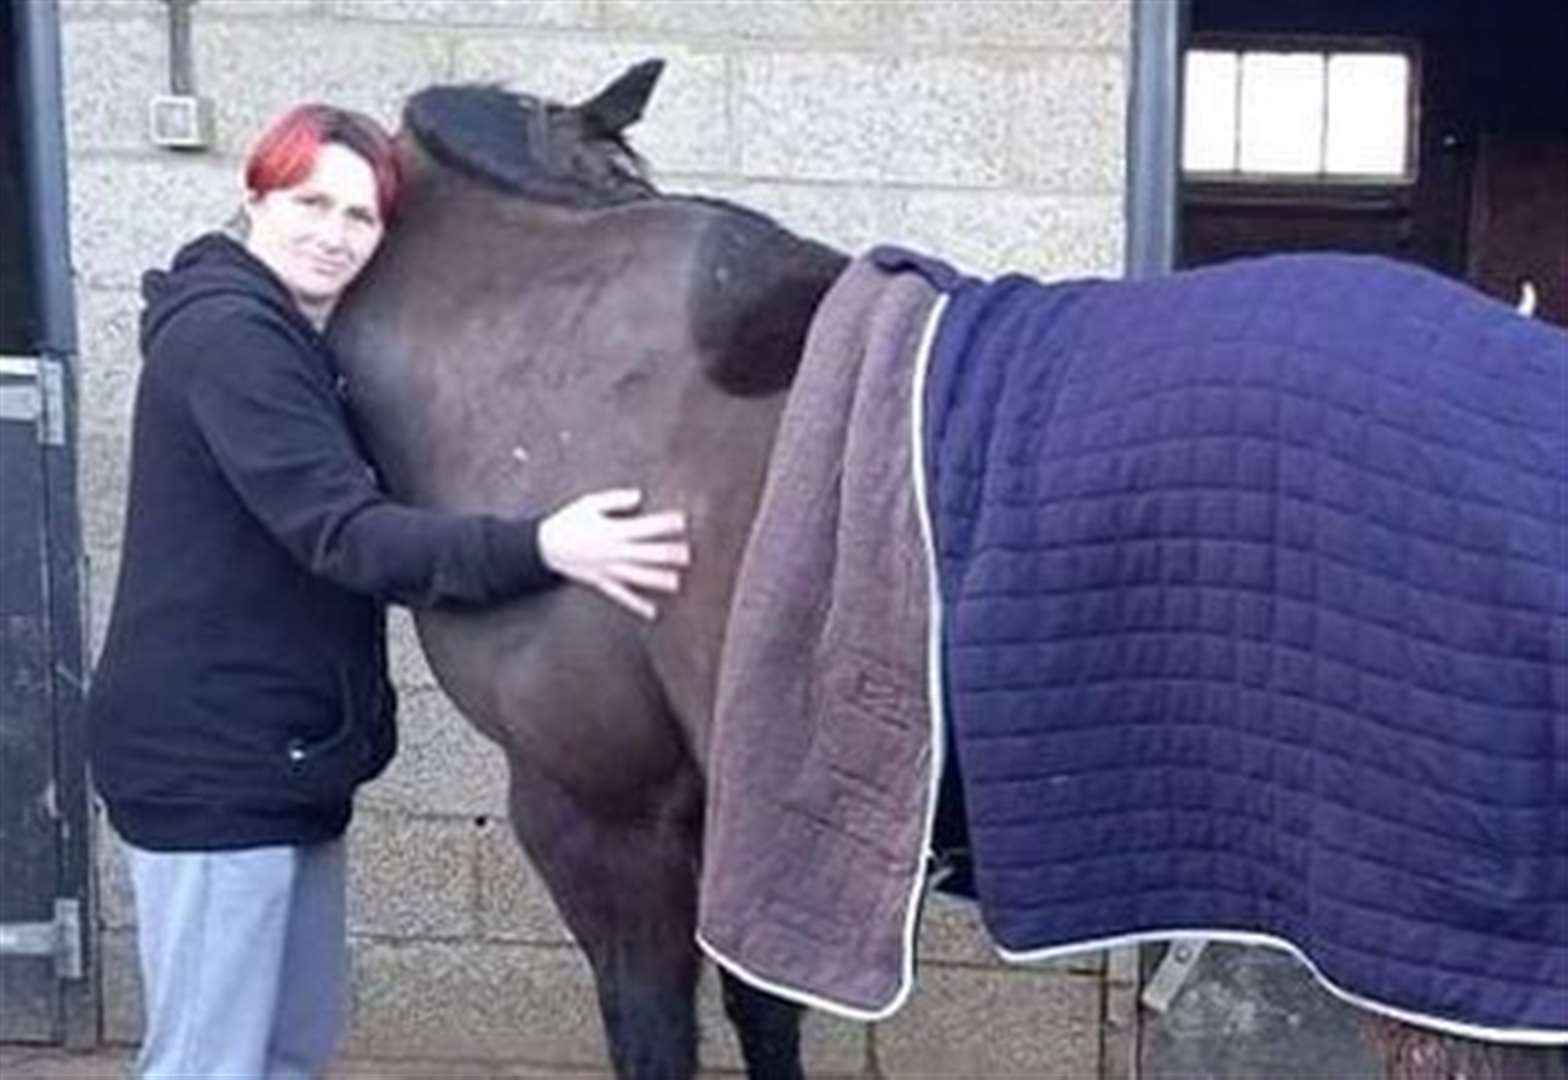 How horses are helping people with mental health struggles